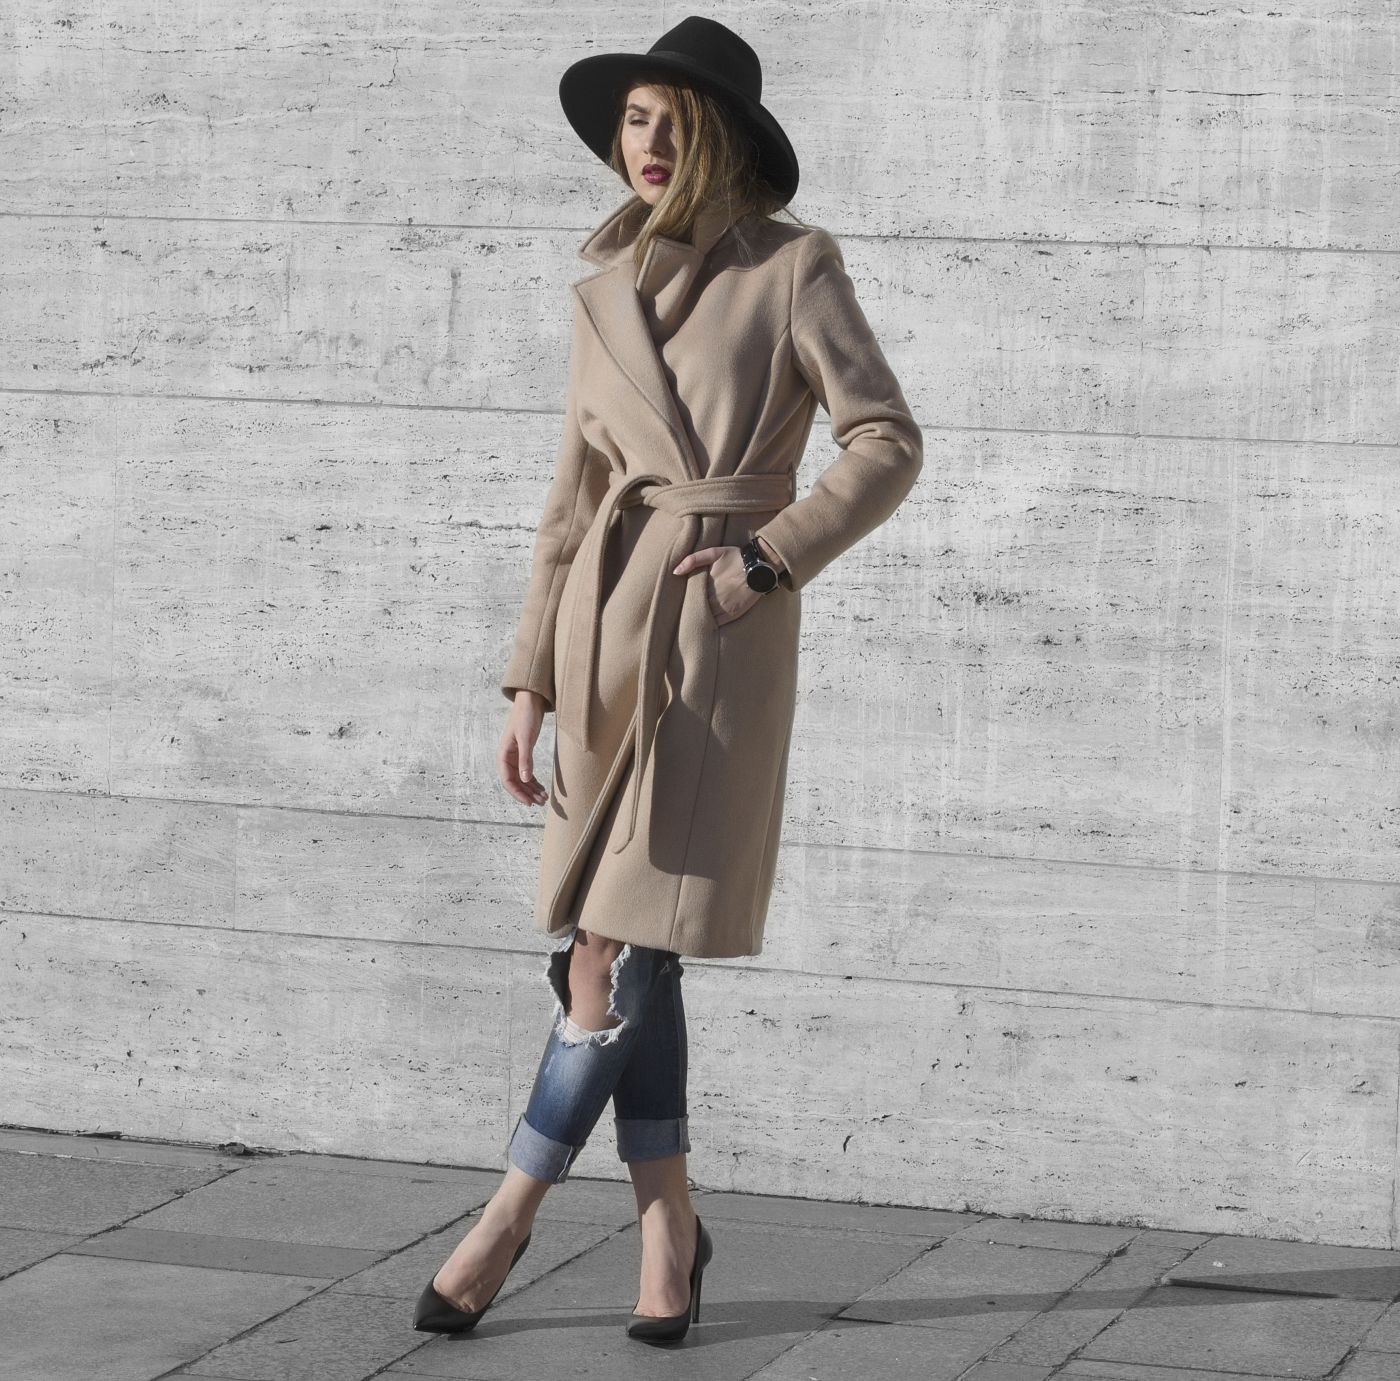 Last Minute Couture, Luana Codreanu, All The Vivids, enslucas, street style, camel coat, ripped jeans, Gino Rossi, Answear, H&M wool hat, trends, winter, fashion, style, fashion blogger, popular, cool, 2016, ootd, outfit, style blogger